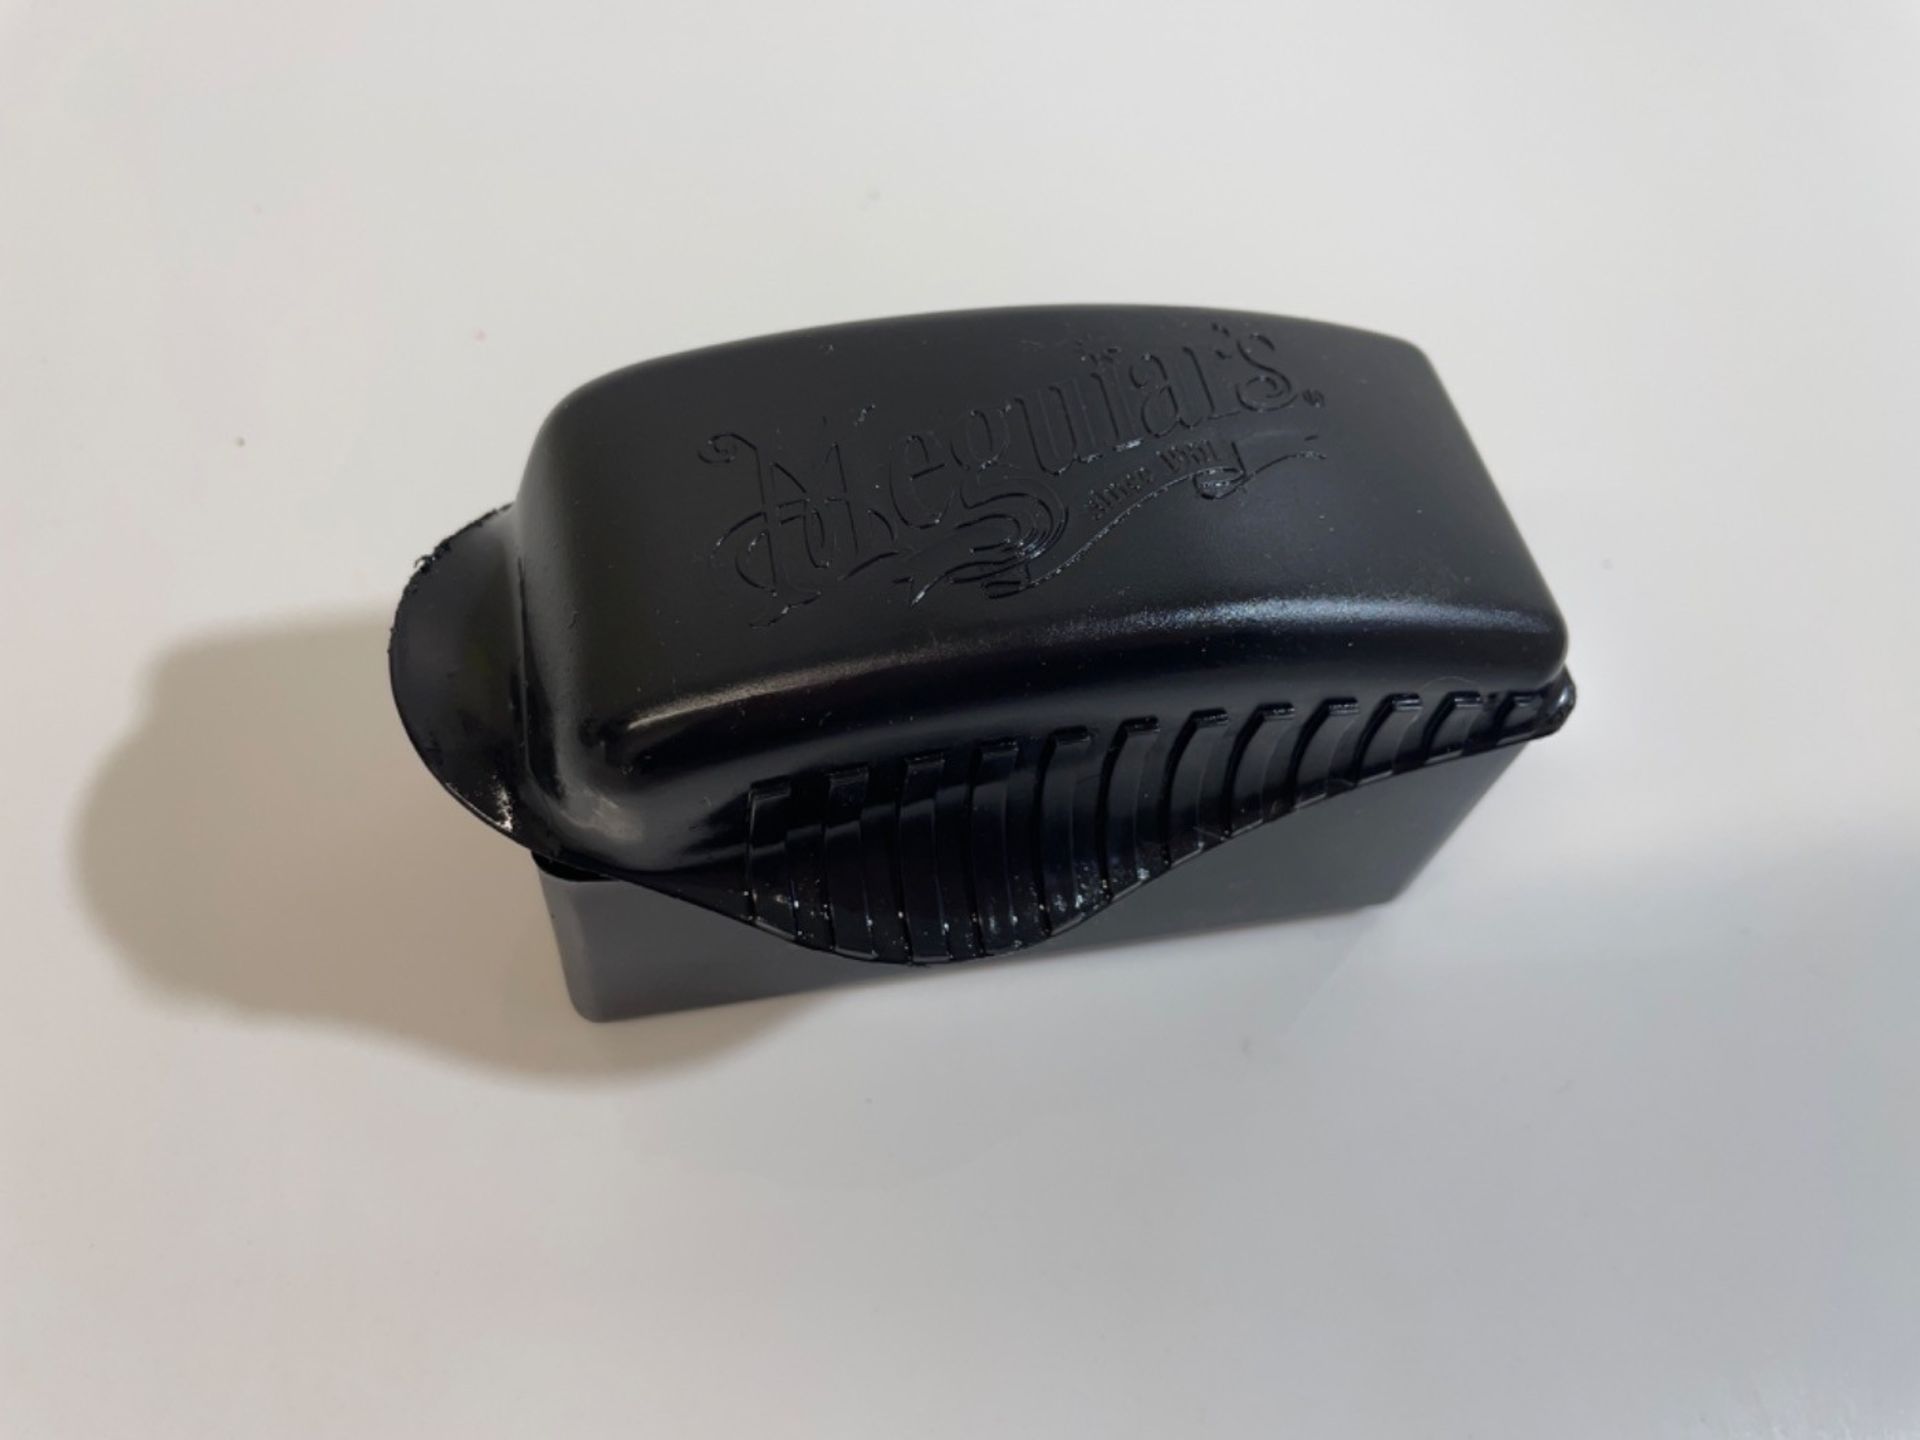 Meguiar's X3090 Tire Dressing Applicator (with case) for Endurance Tire Gel - Image 3 of 3